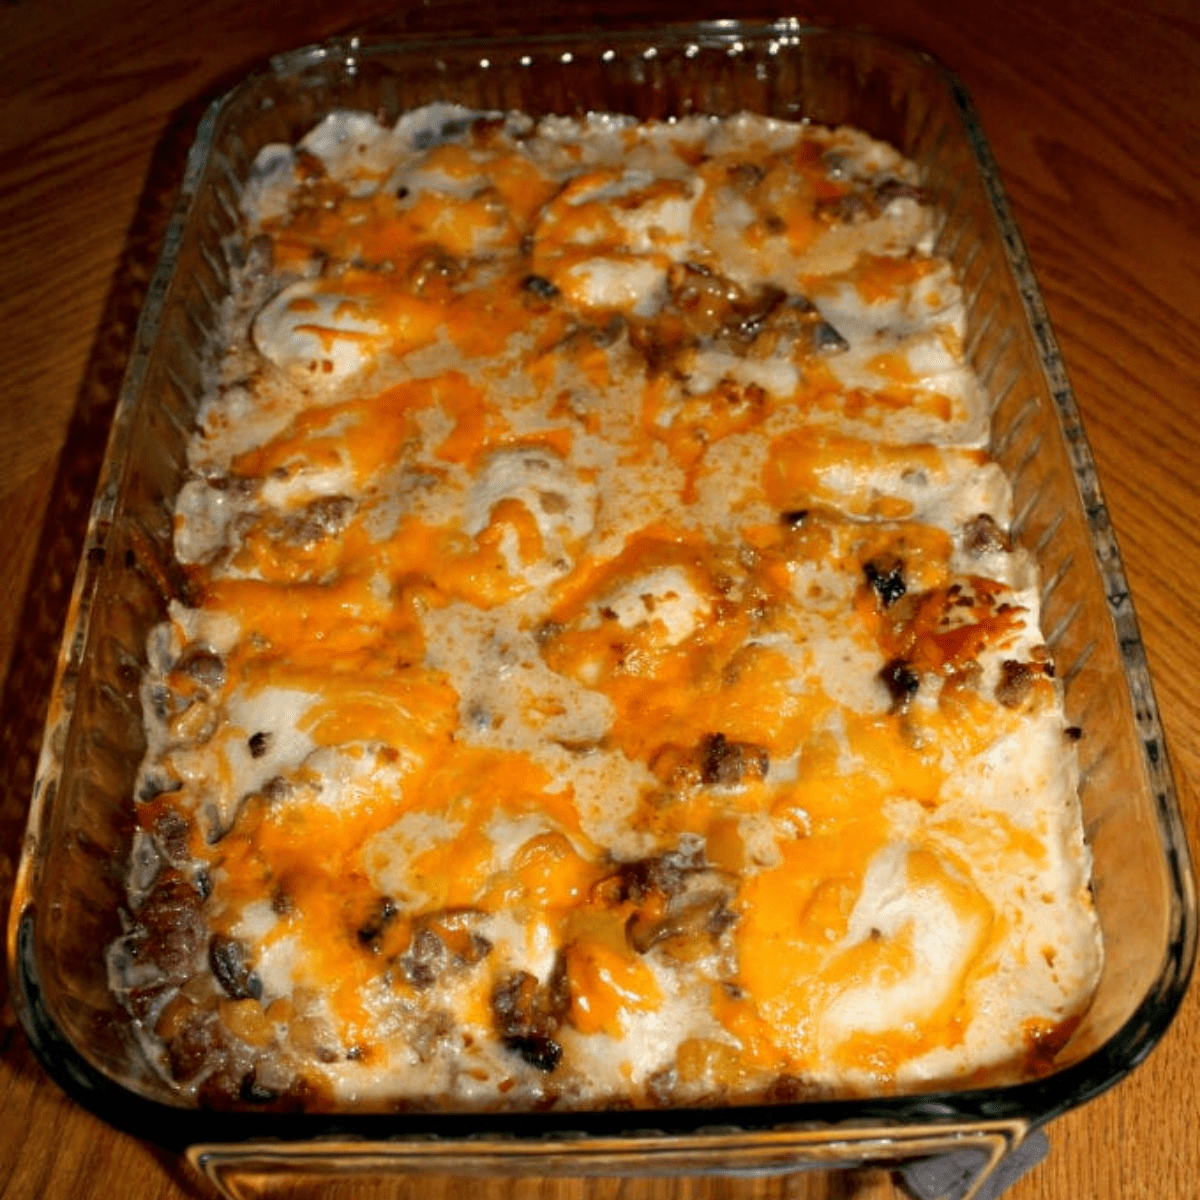 Casserole in a clear baking pan.  A metal spoon is scooping up a spoonful of the casserole.